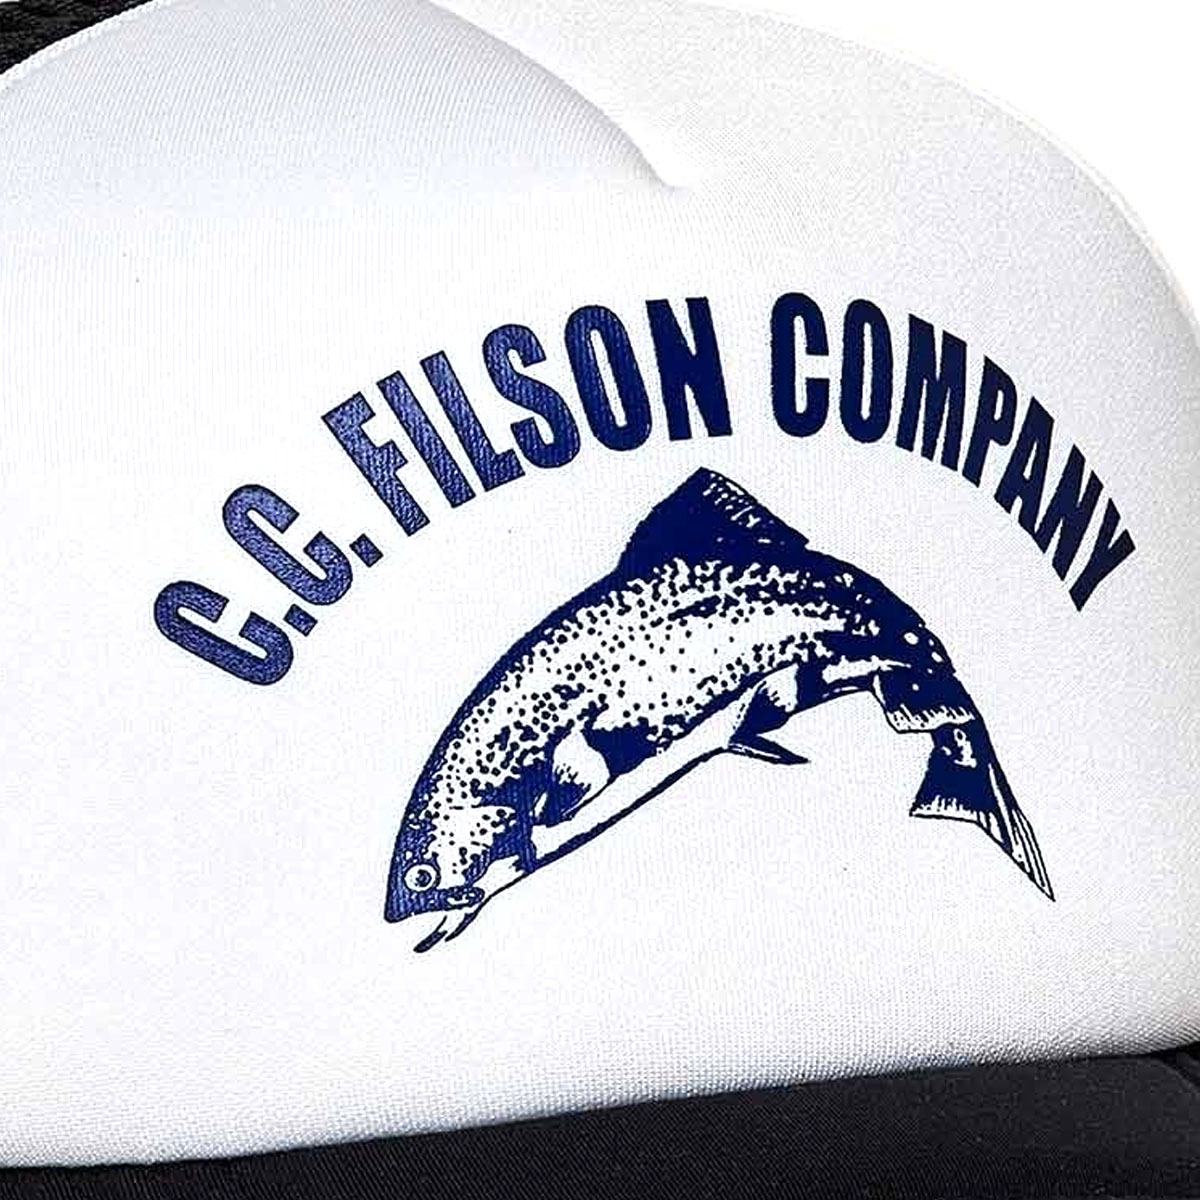 Filson Mesh Harvester Cap White Fisherman's Terminal, durable cap with breathable sun protection